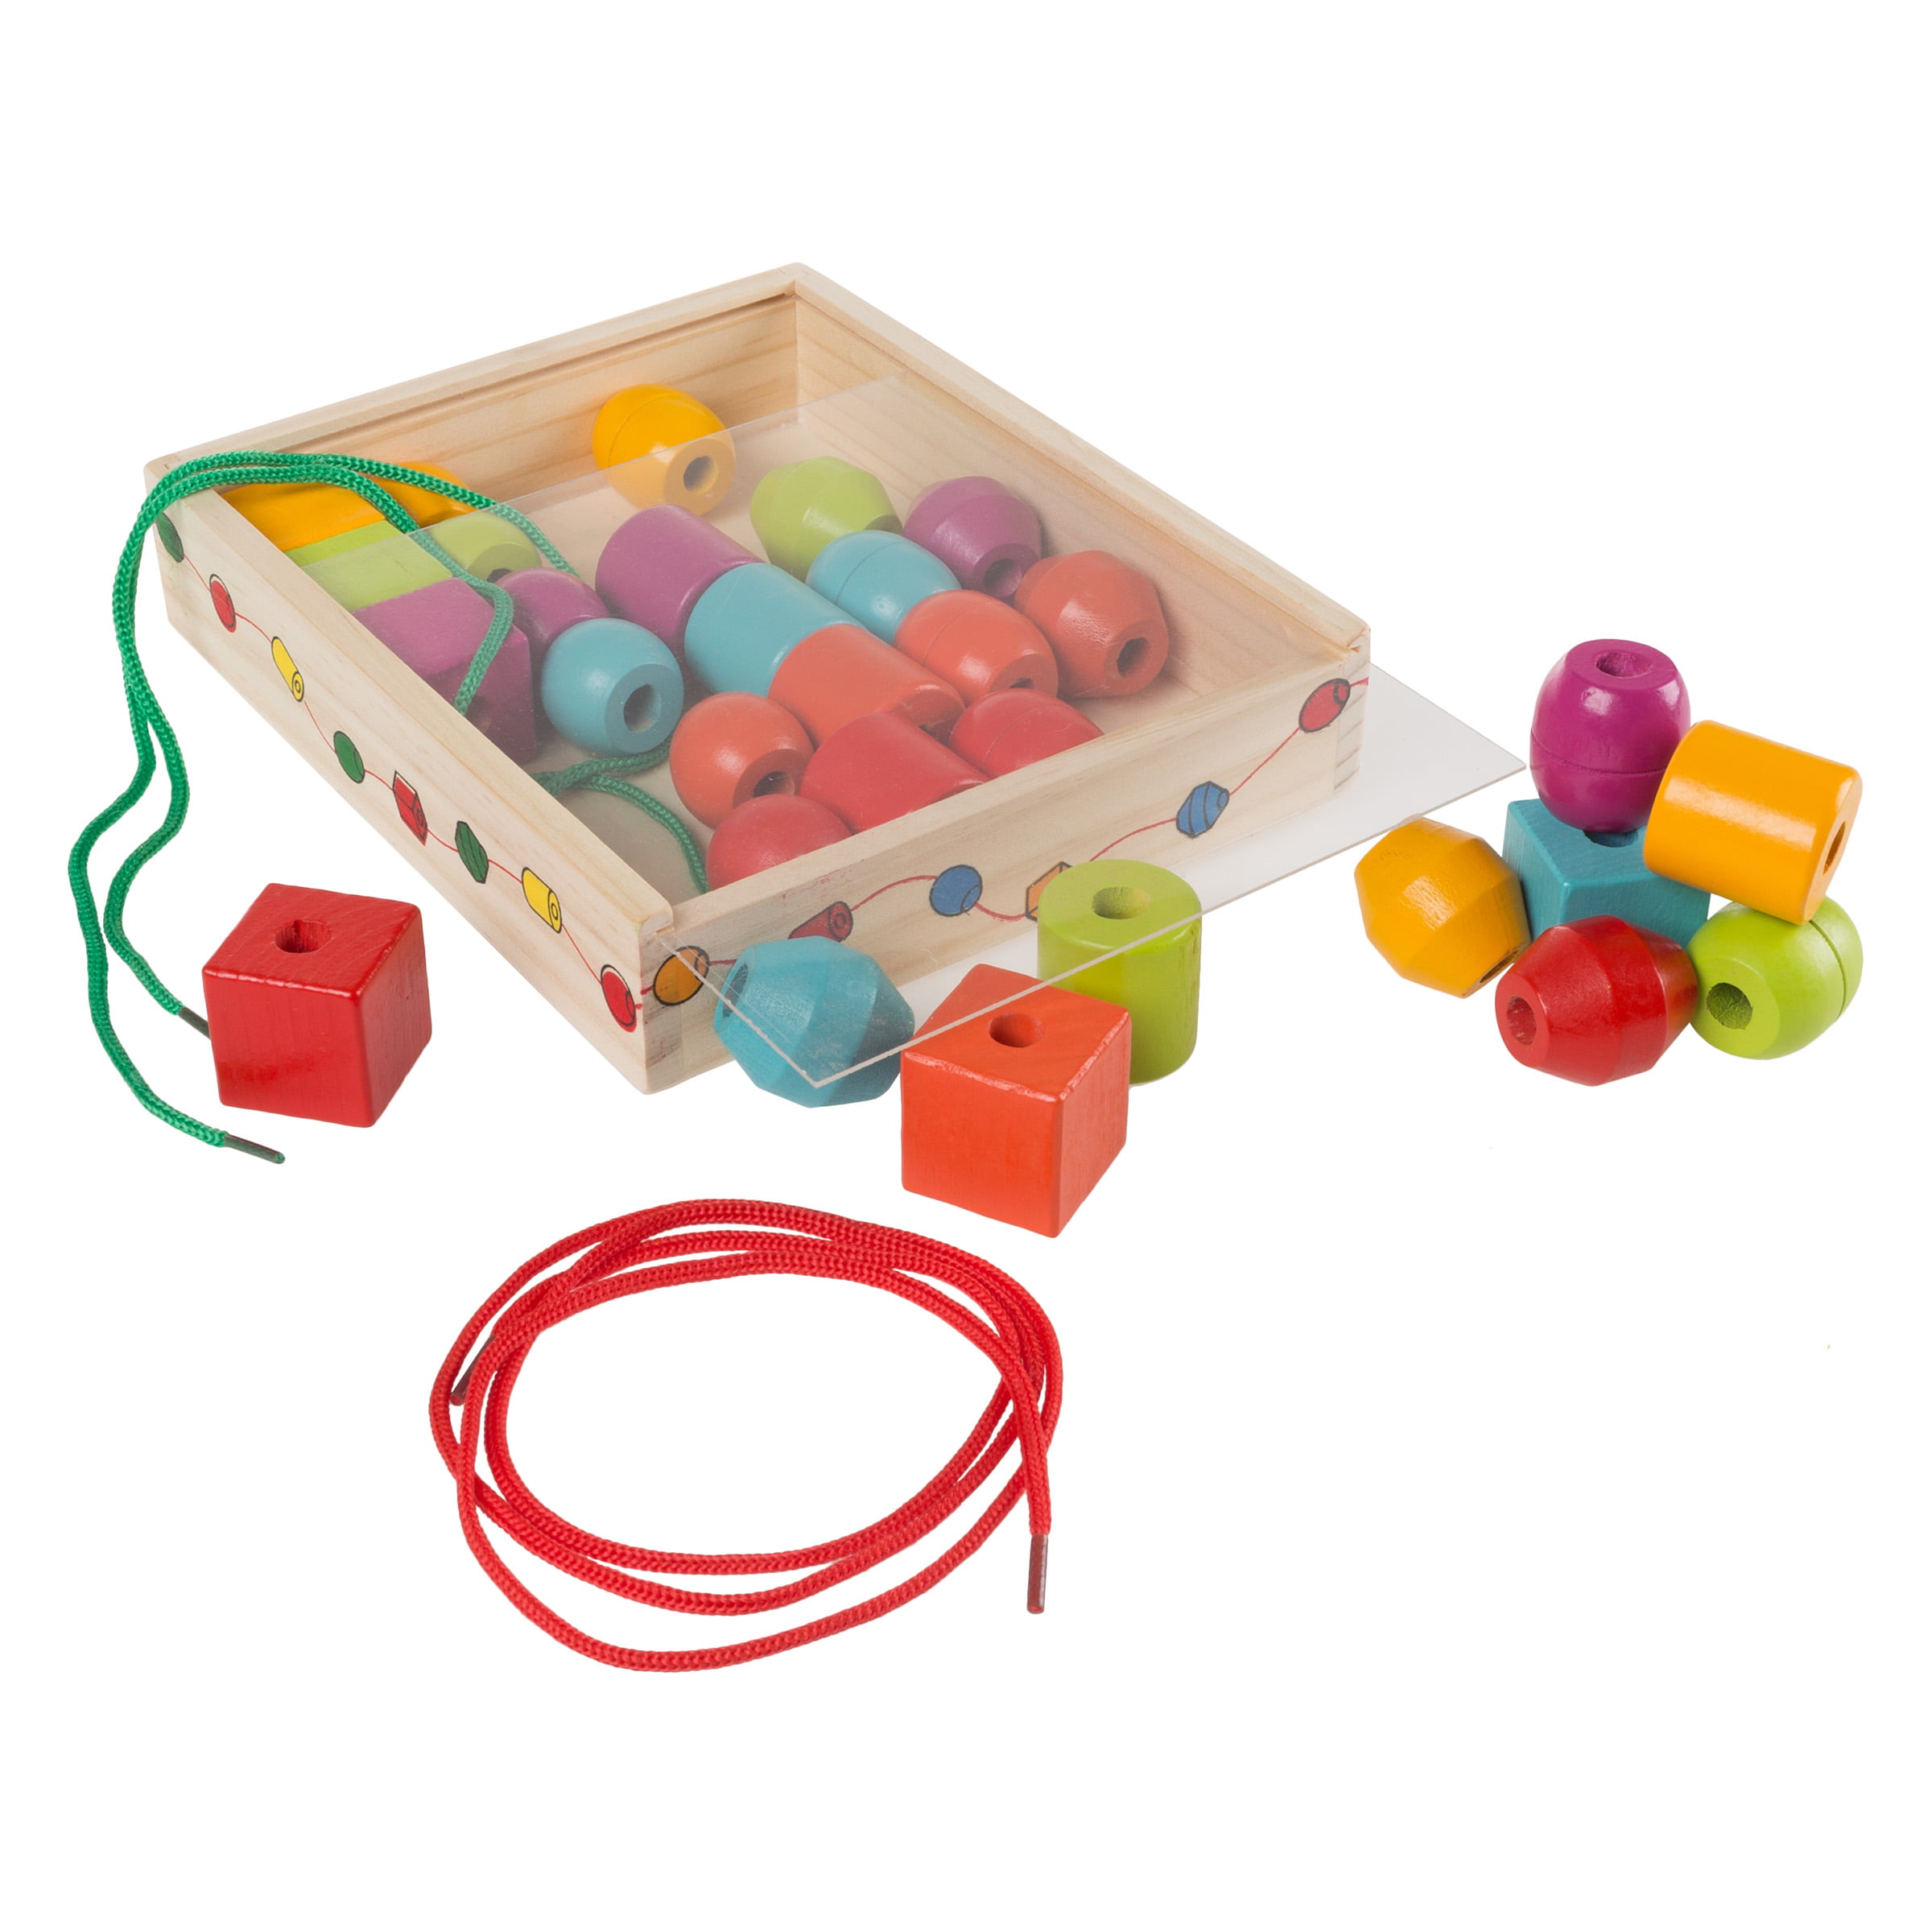 All in a Heart-shaped Case for Your Kids Instructive 50pcs Wooden Lacing & Stringing Beads with String Lacing Beads in Multiple Shapes and Colors for Toddlers Preschoolers Fine Motor Skills Toys 